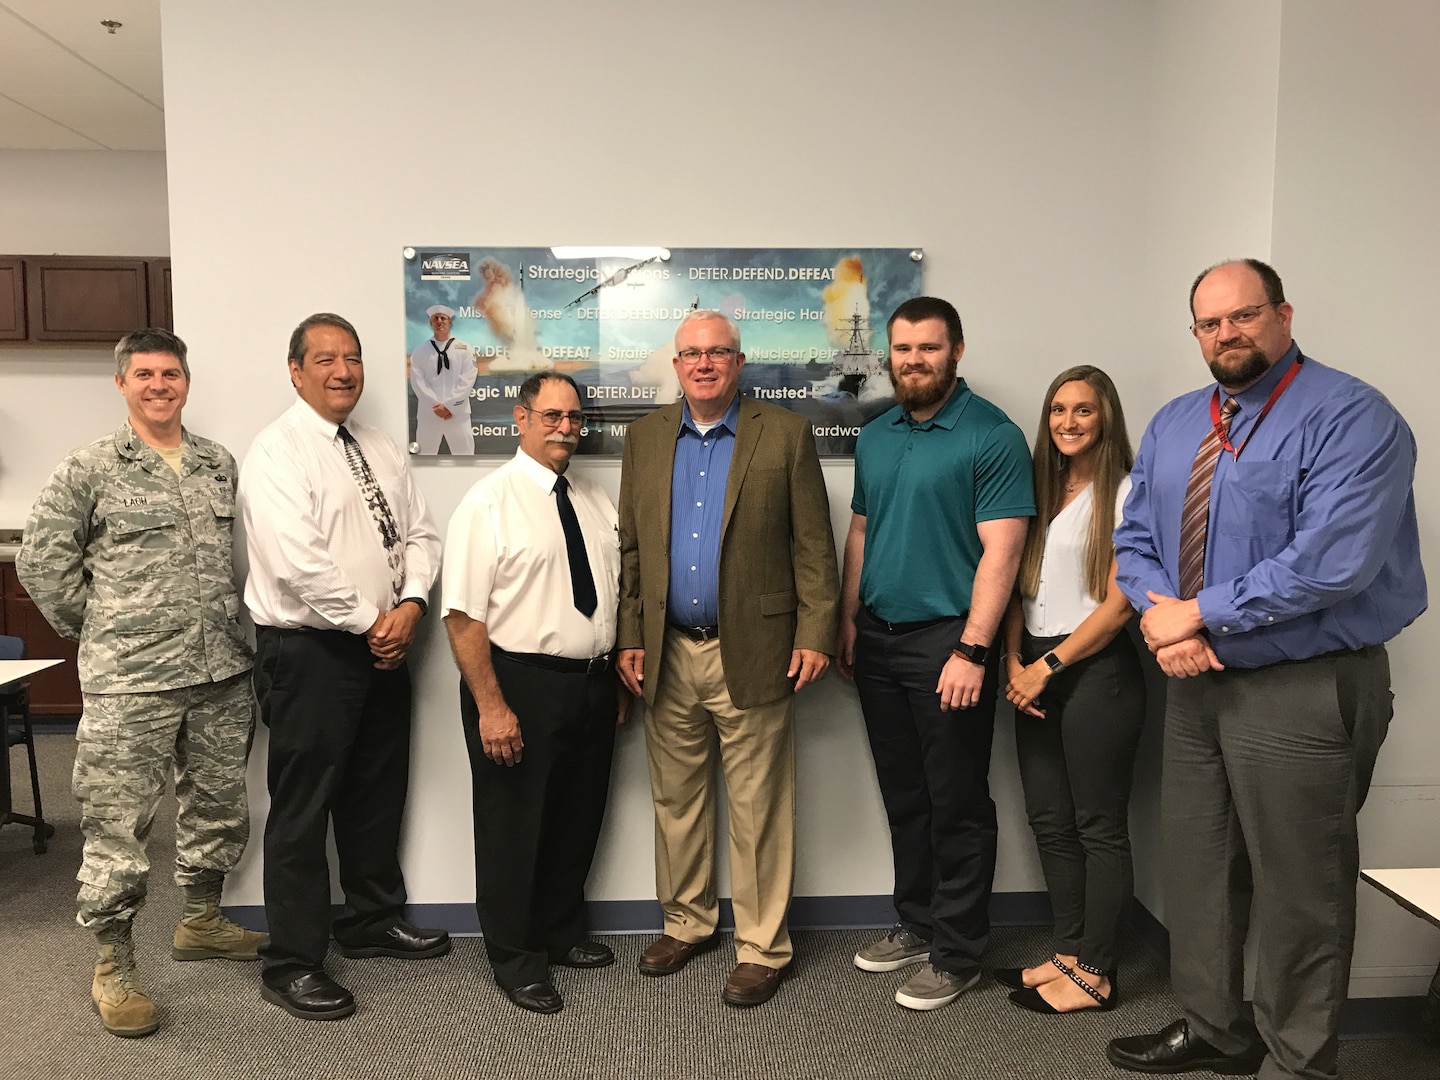 Andrew Steffey, third from right, poses for photo with Mr. Vickers (SES) during his visit to NSWC Crane. Steffey is part of the Pathways Internship Program, which is designed to provide students with opportunities to work and explore Federal careers while still in school. Steffey, who is also currently a senior at USI studying Electrical Engineering, says he was able to put into practice the engineering concepts he is learning at USI.